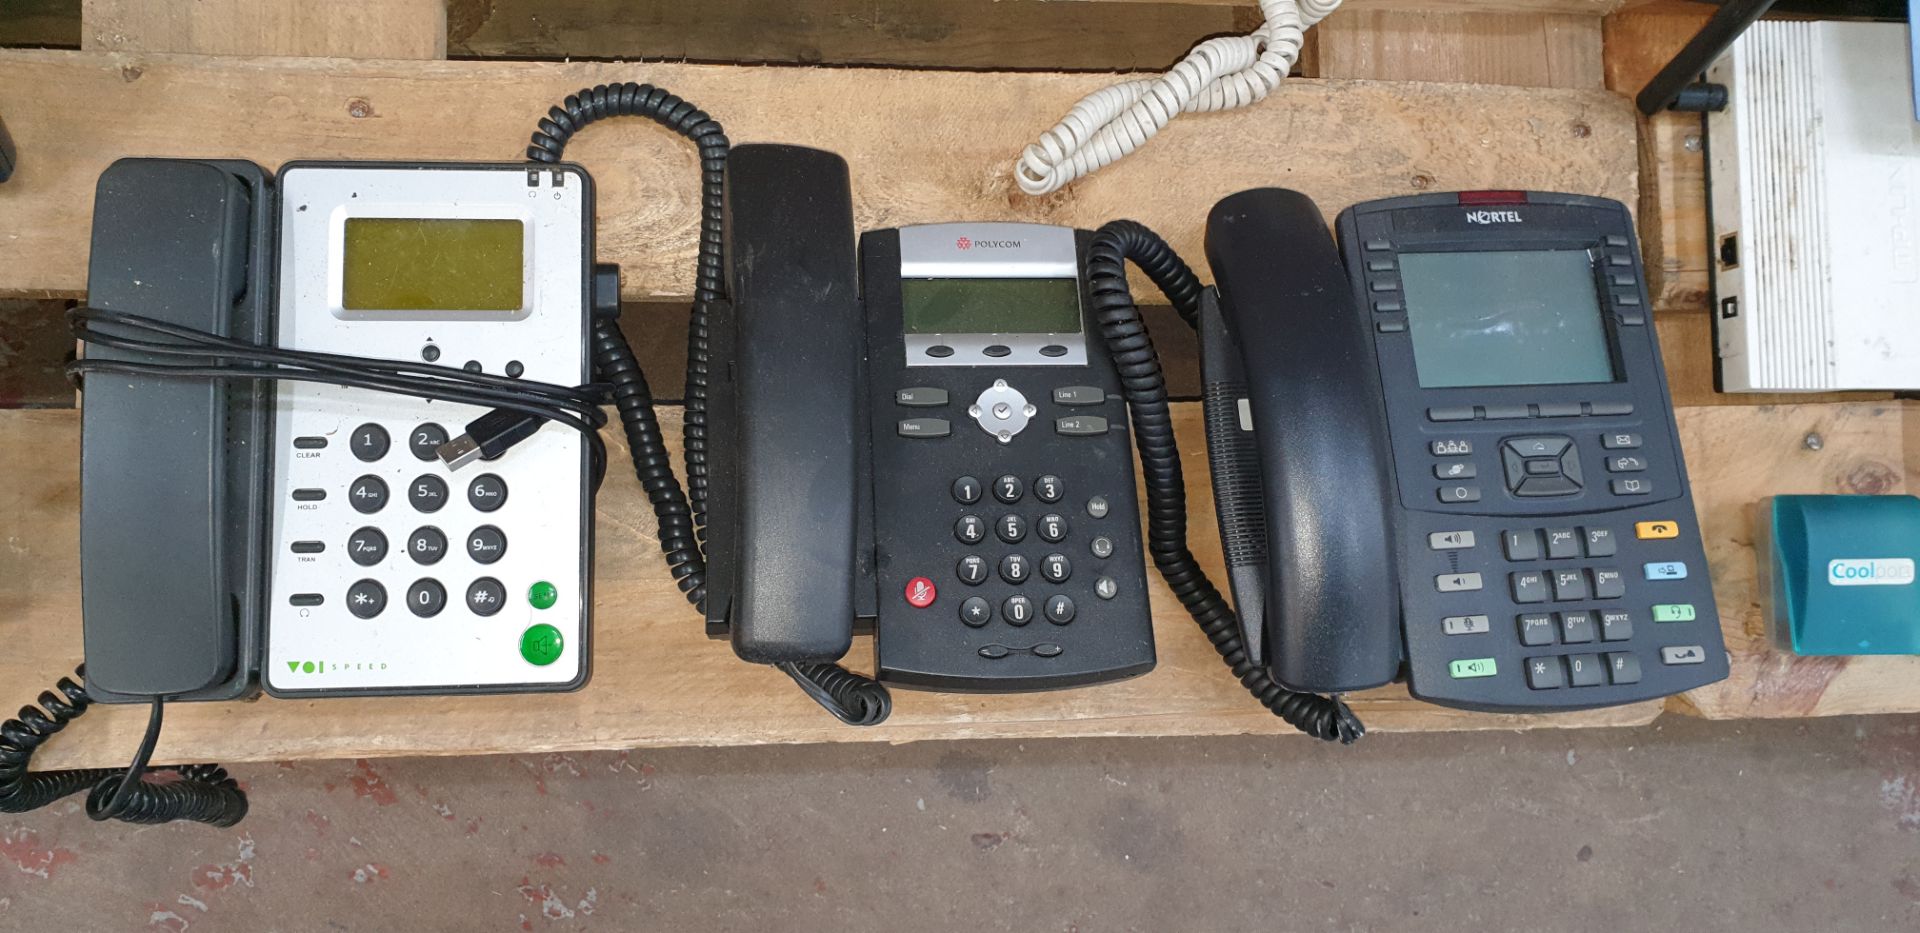 16 off assorted telephone handsets by Polycom, Cisco, Splicecom, Nortel & others - Image 6 of 8